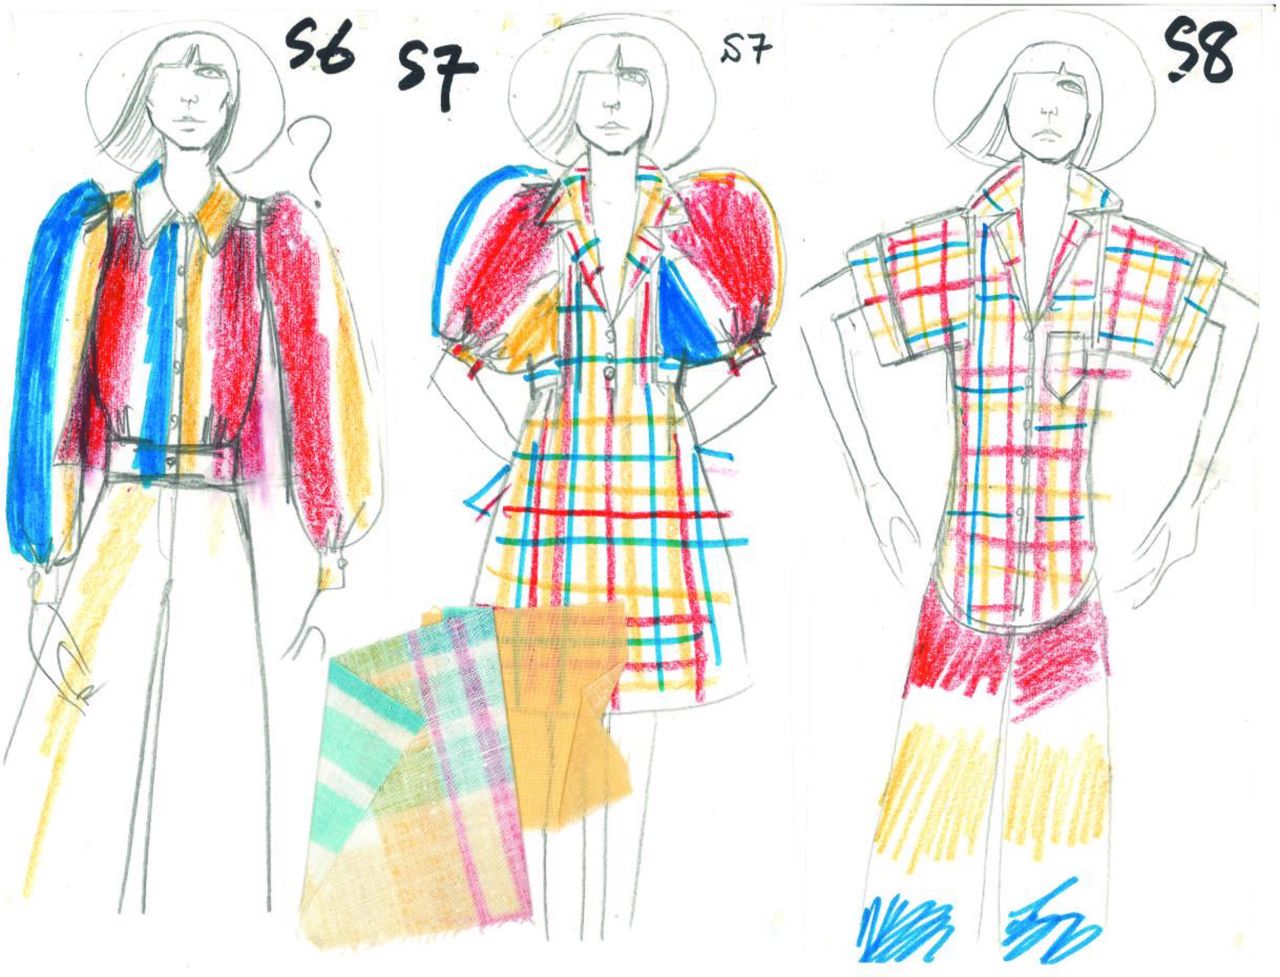 Three sketches from Kenzo's 1972 collection.